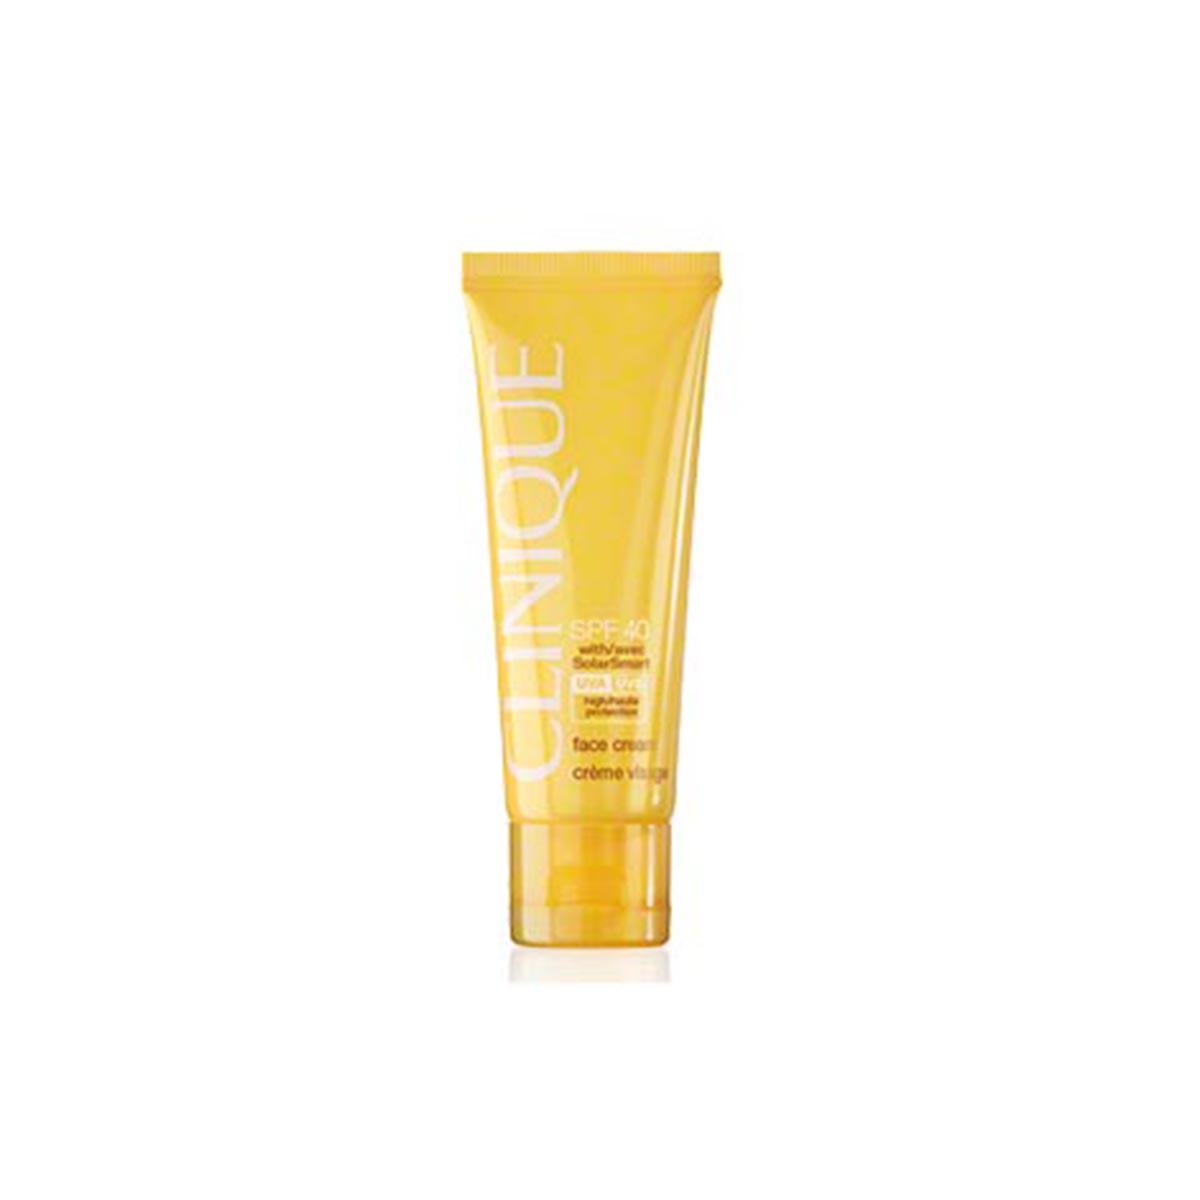 Clinique Spf40 50ml One Size Yellow